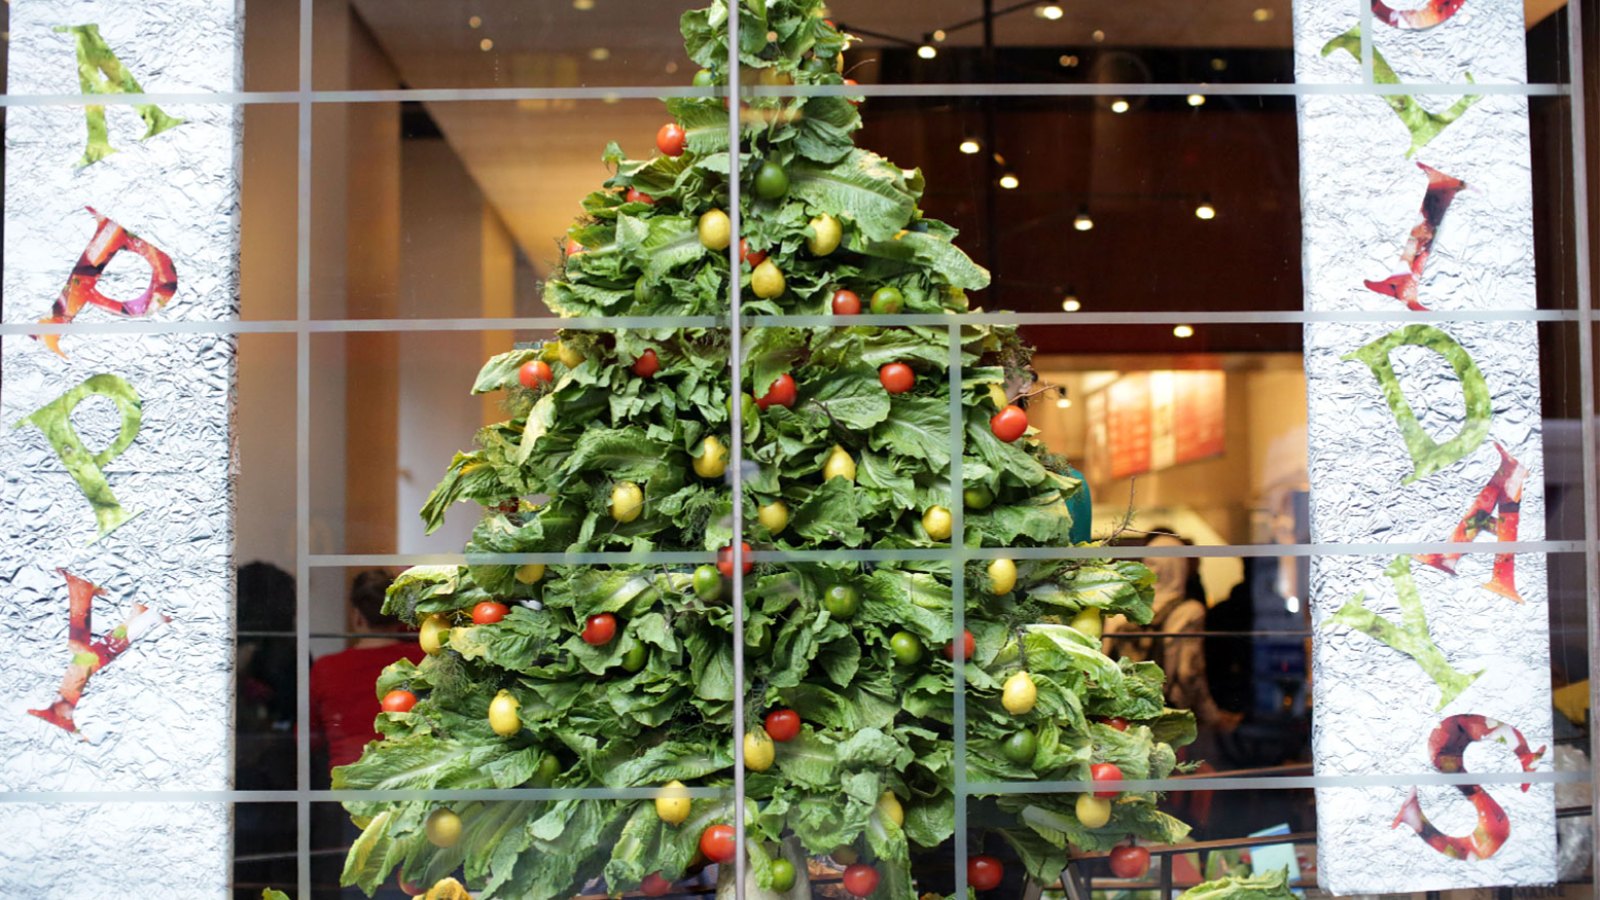 Chipotle Celebrates Holidays With Festive Window Display Built From Real Ingredients